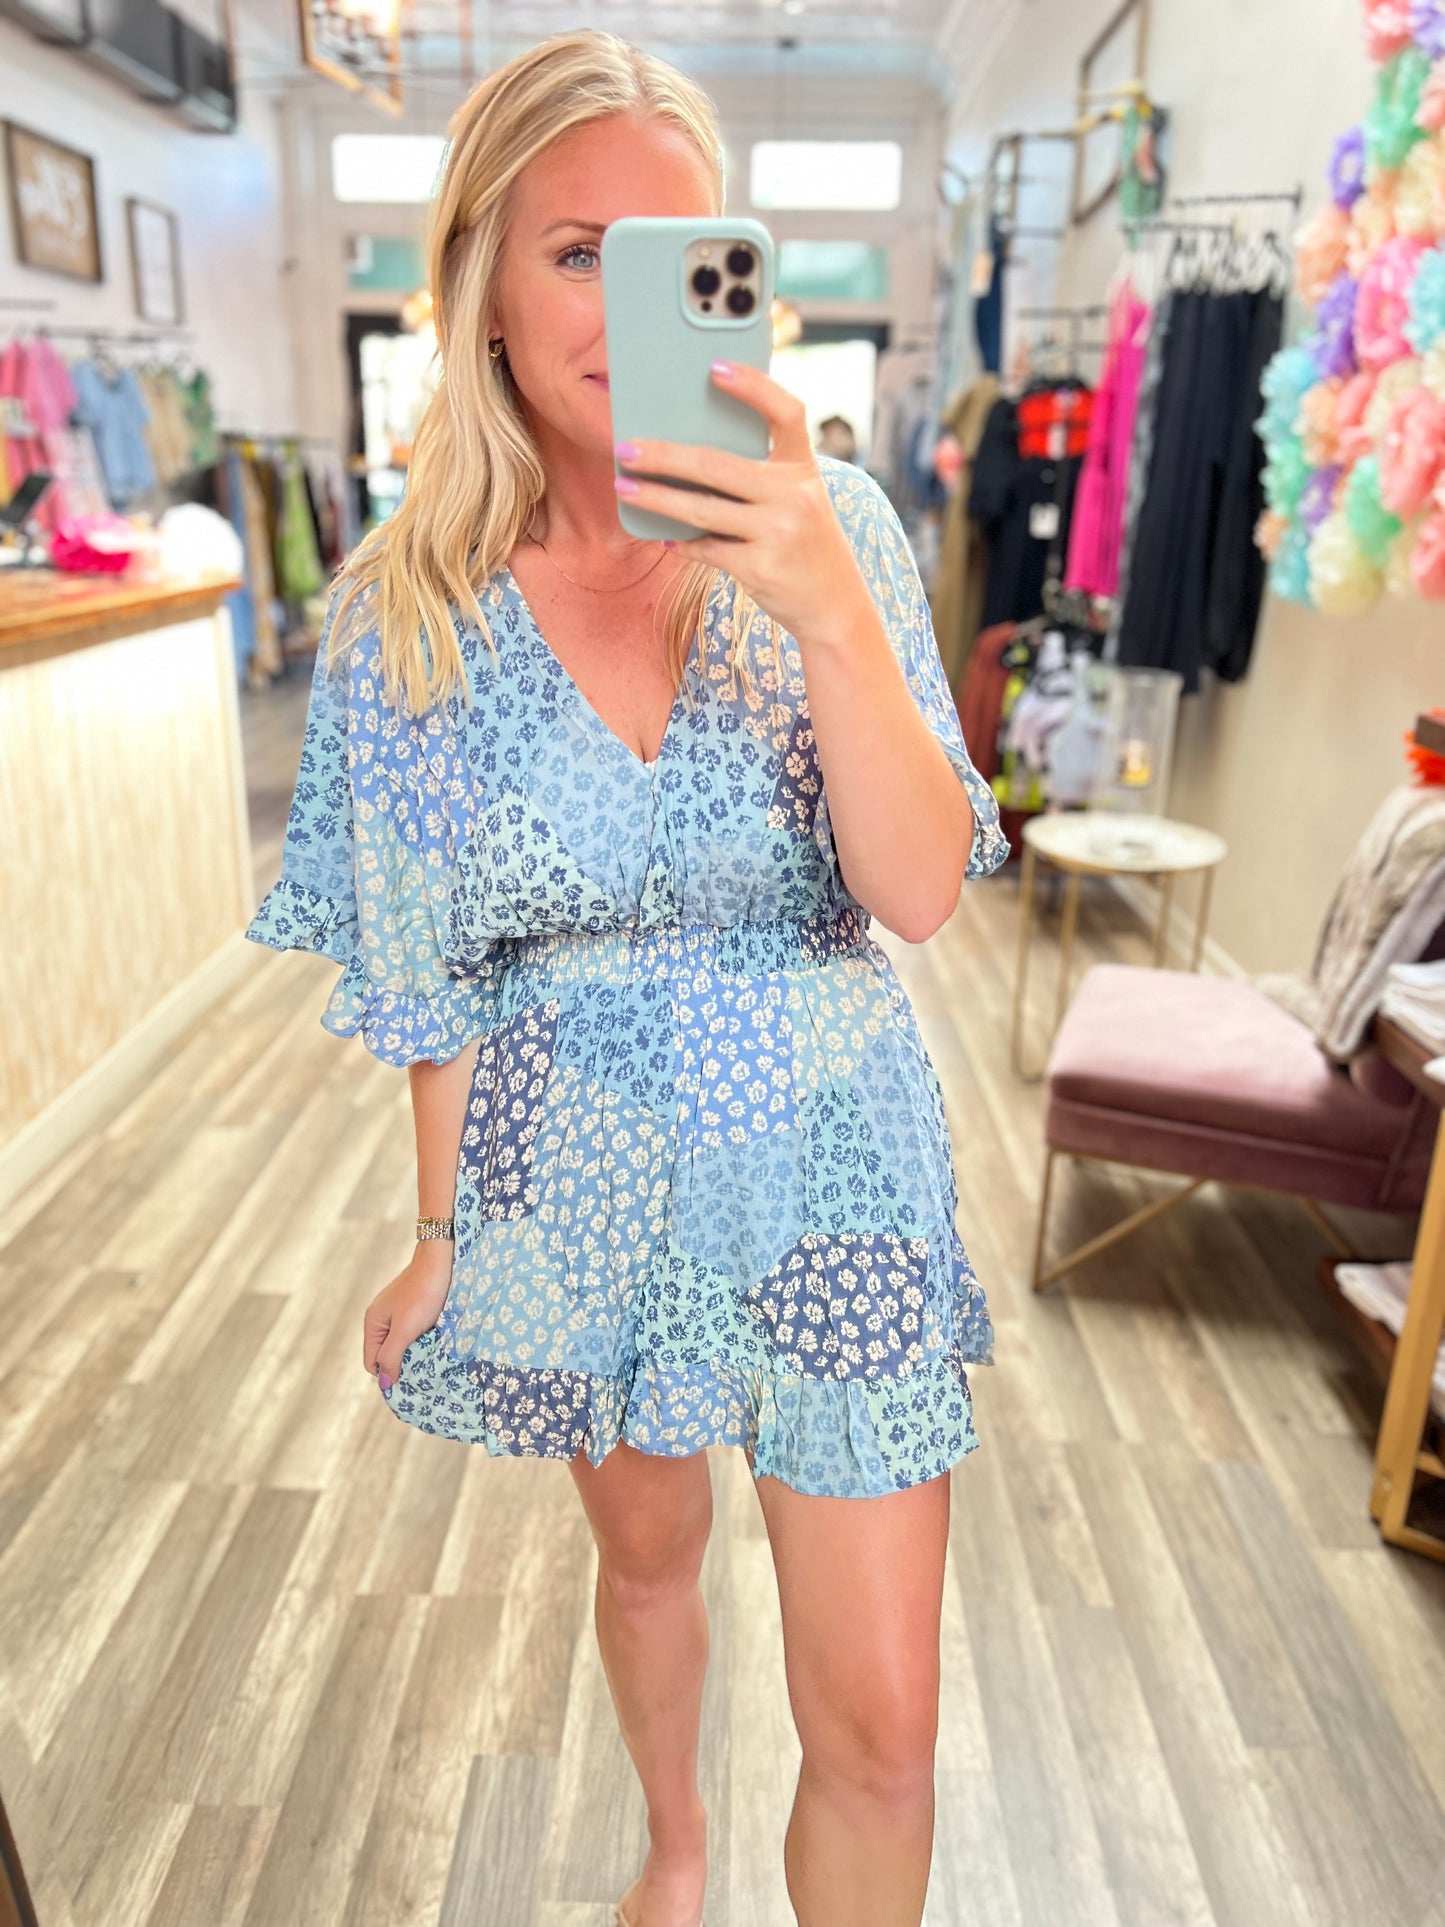 Summer Days Are Here! Romper